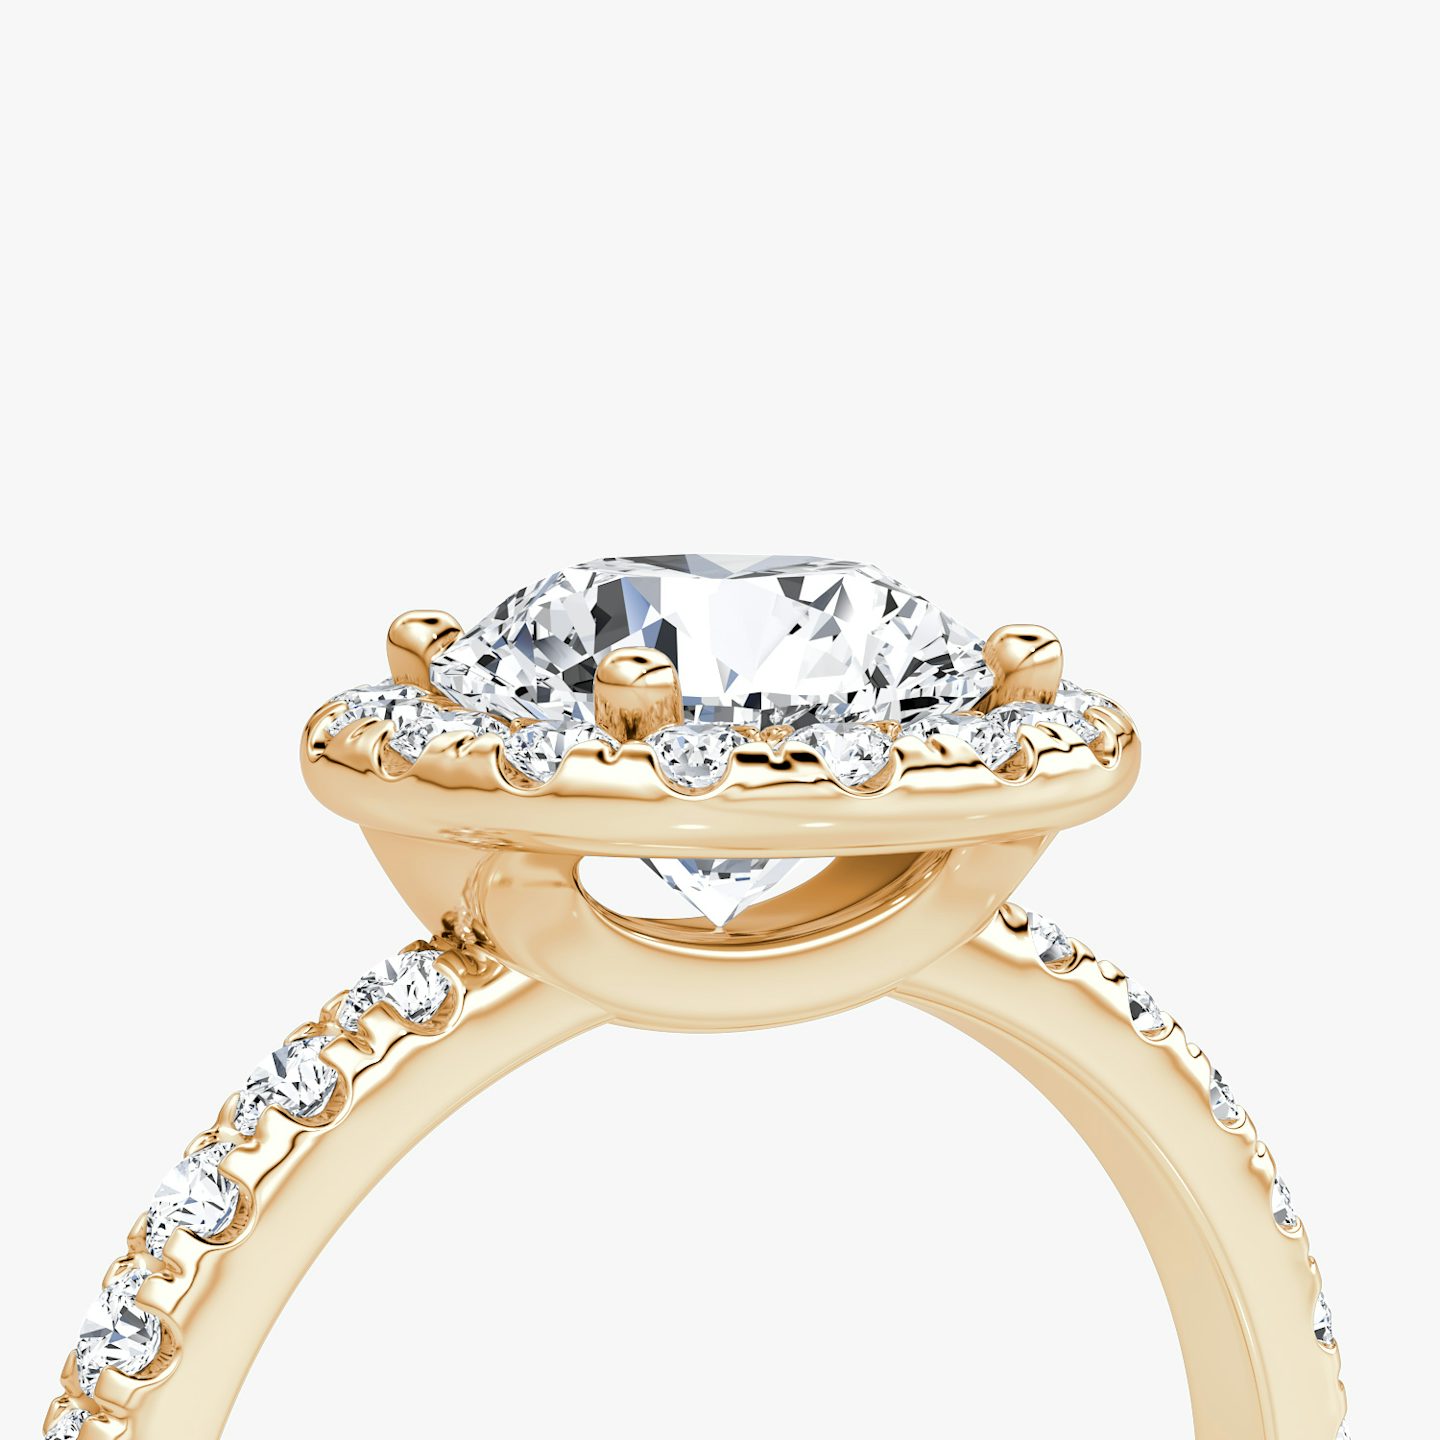 undefined | Rond Brillant | 14k | Or rose | bandAccent: Pavé | caratWeight: other | haloSize: large | diamondOrientation: vertical